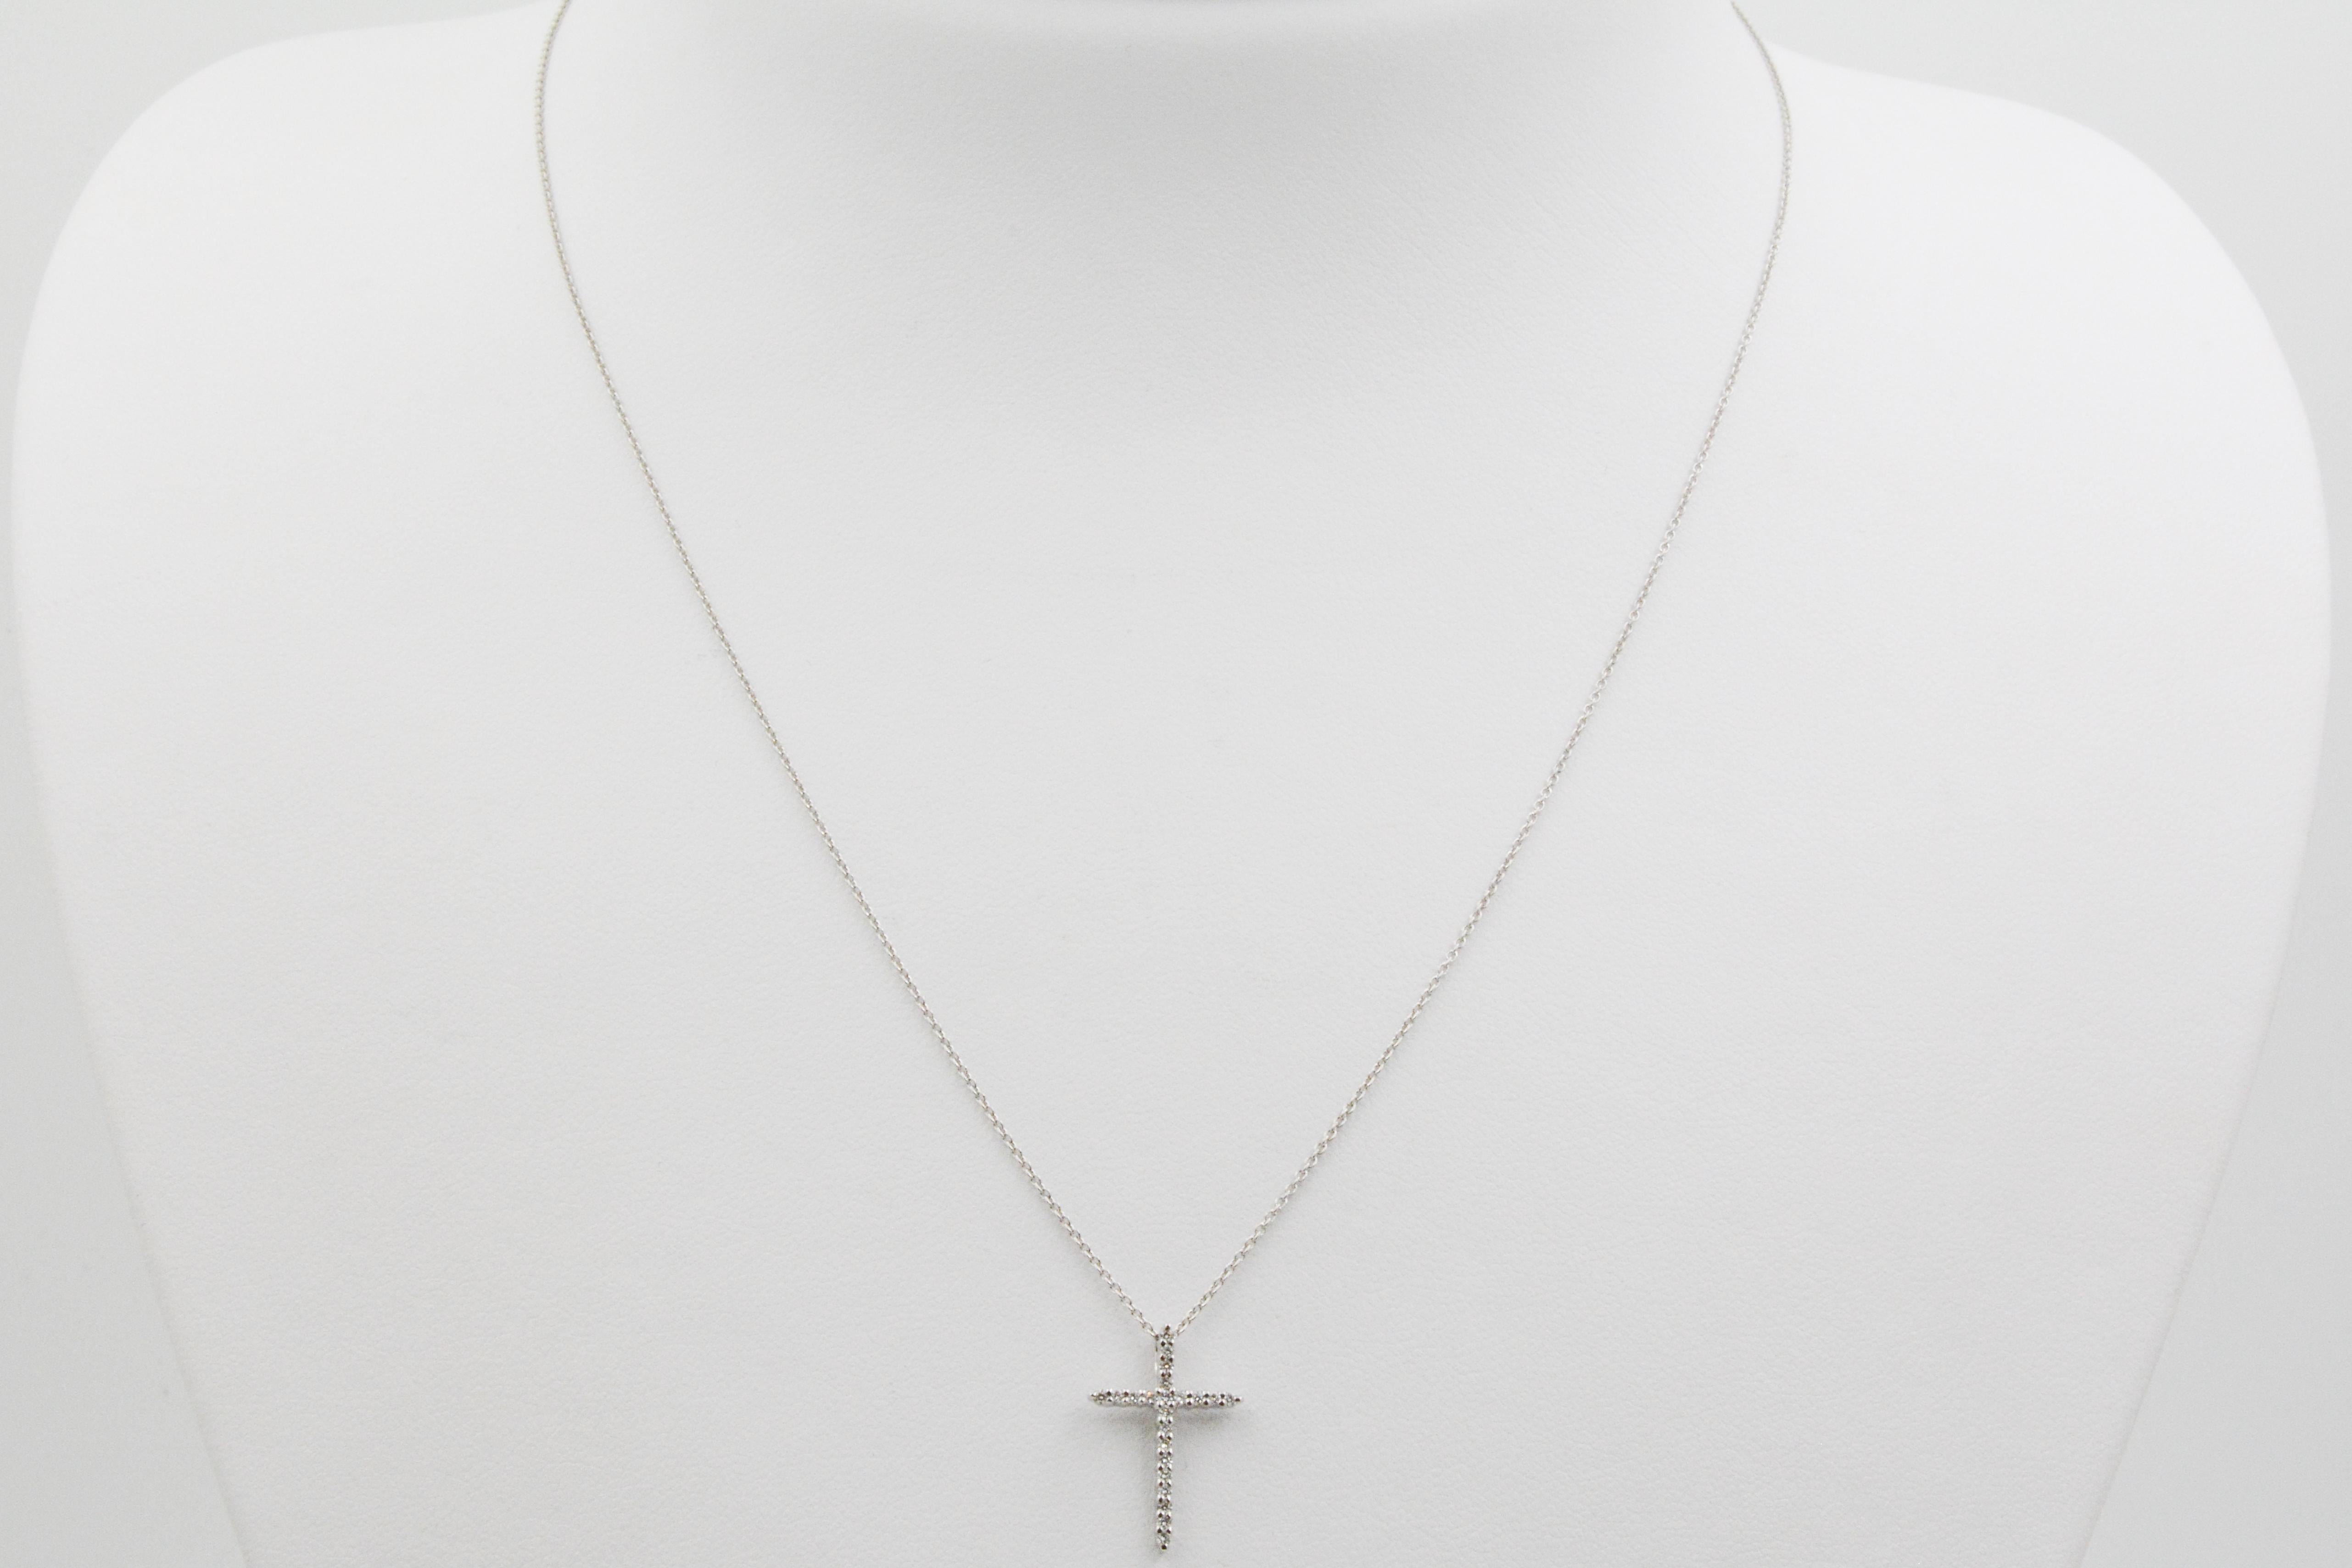 From Roberto Coin, this Tiny Treasures pendant features an 18k white gold and diamond cross, weighing a total of .10 carats. The pendant is on a 16-18” adjustable link chain. The necklace also has the famous Roberto Coin ruby signature on the back. 